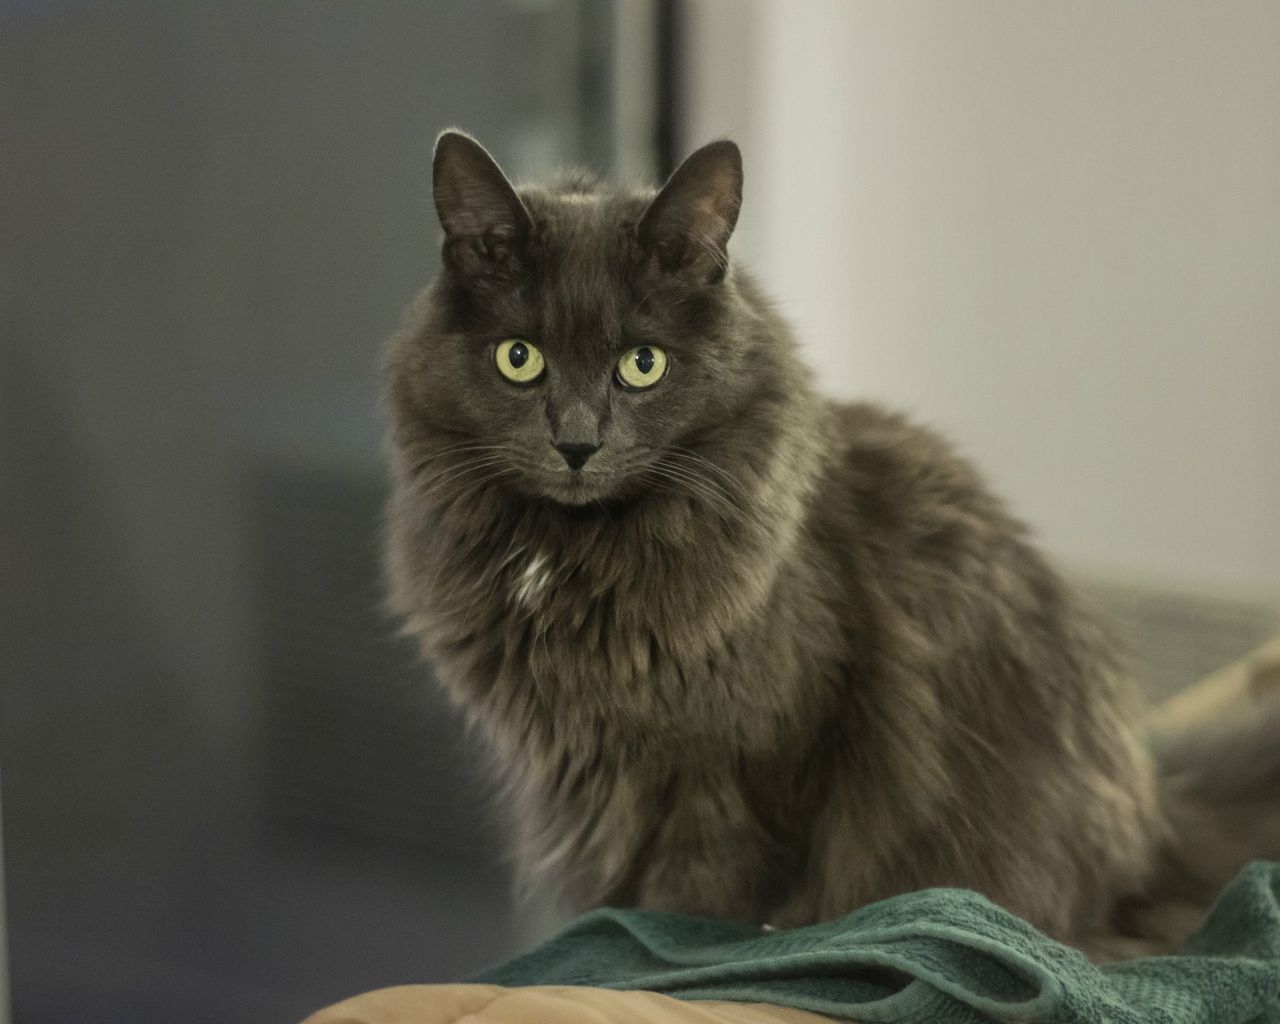 Nebelung Cat for 1280 x 1024 resolution